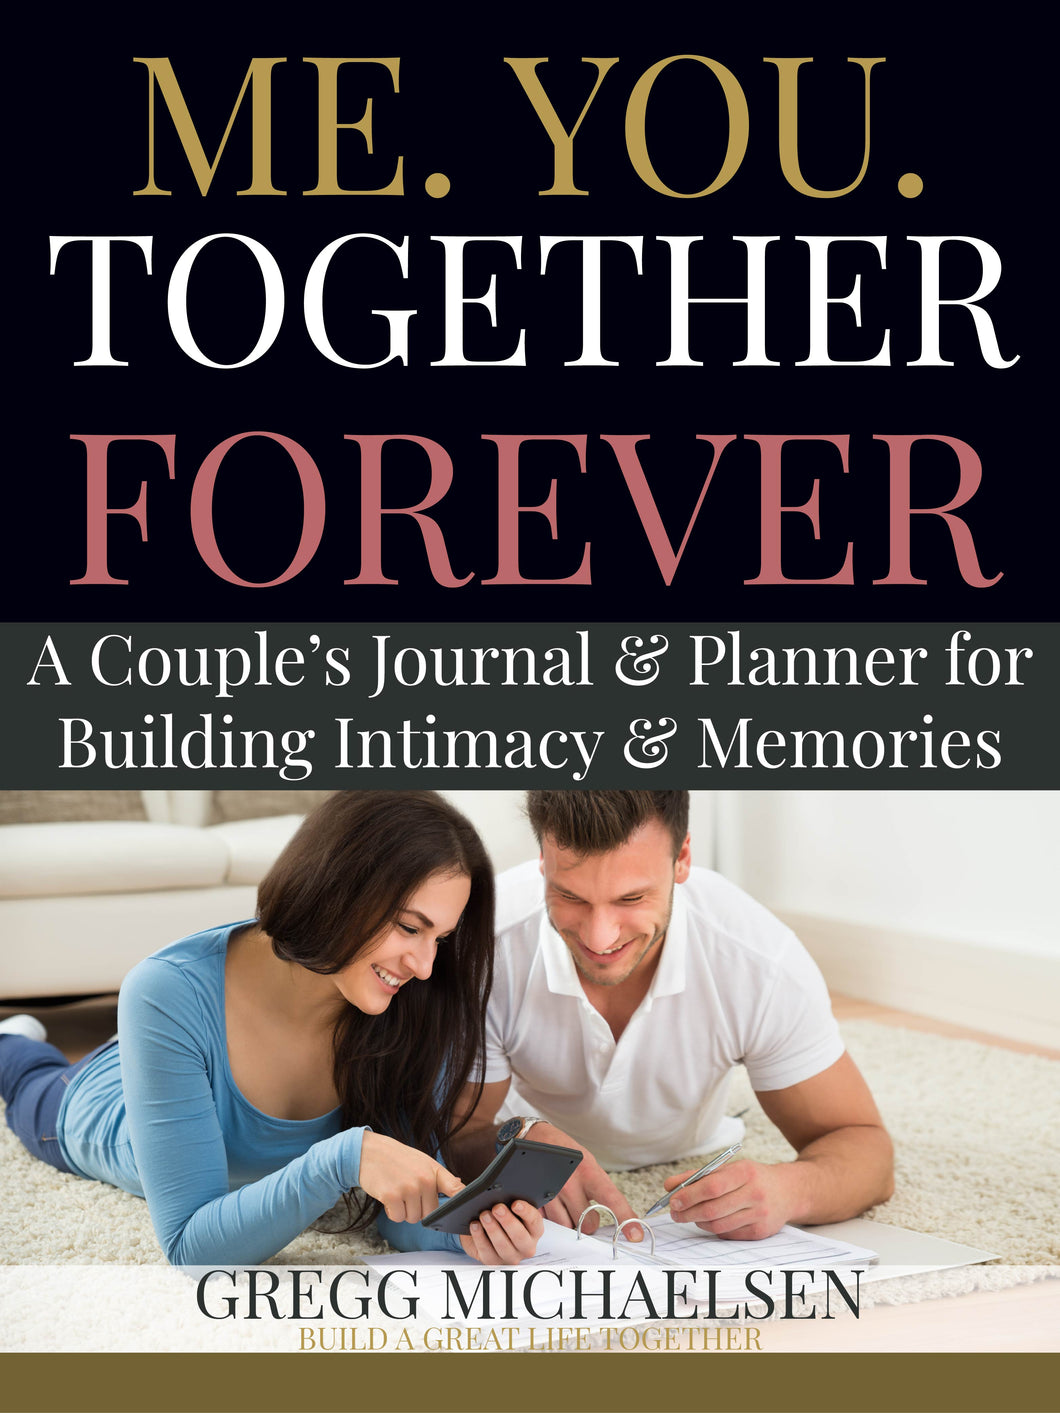 Me. You. Together Forever Printable Couple's Journal